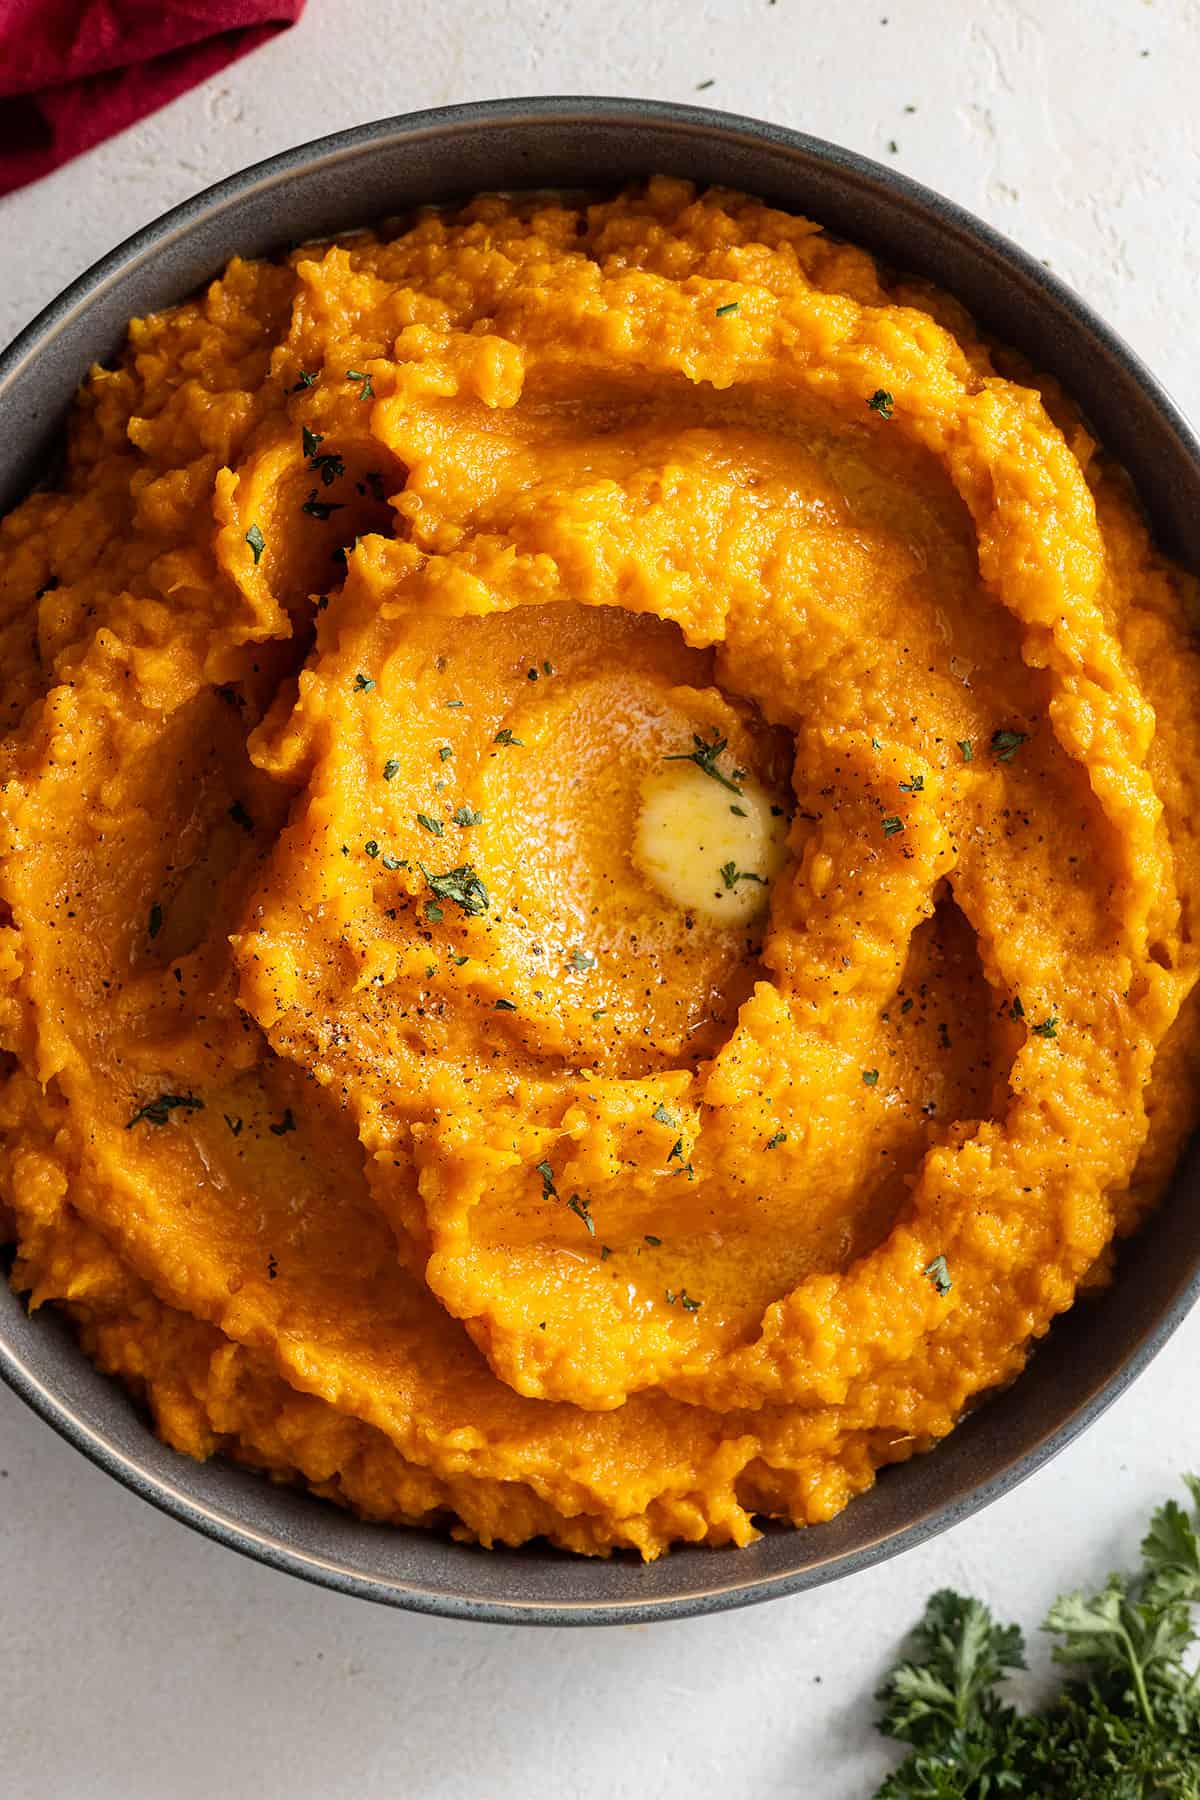 Overhead view of mashed sweet potatoes in a dark colored bowl. Garnished with black pepper, parsley, and melted butter. 